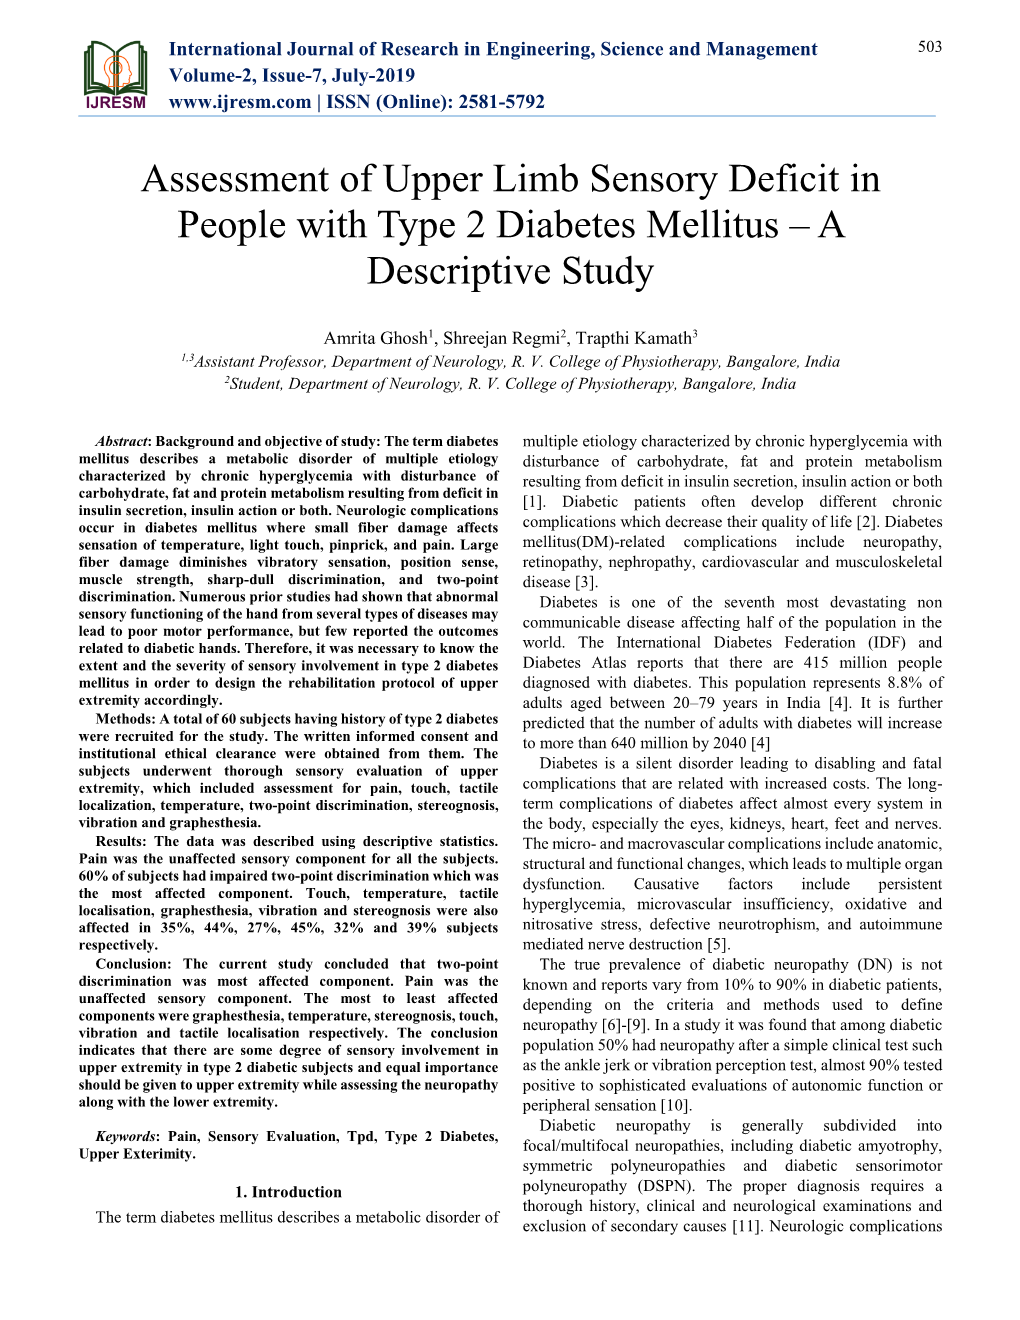 Assessment of Upper Limb Sensory Deficit in People with Type 2 Diabetes Mellitus – a Descriptive Study